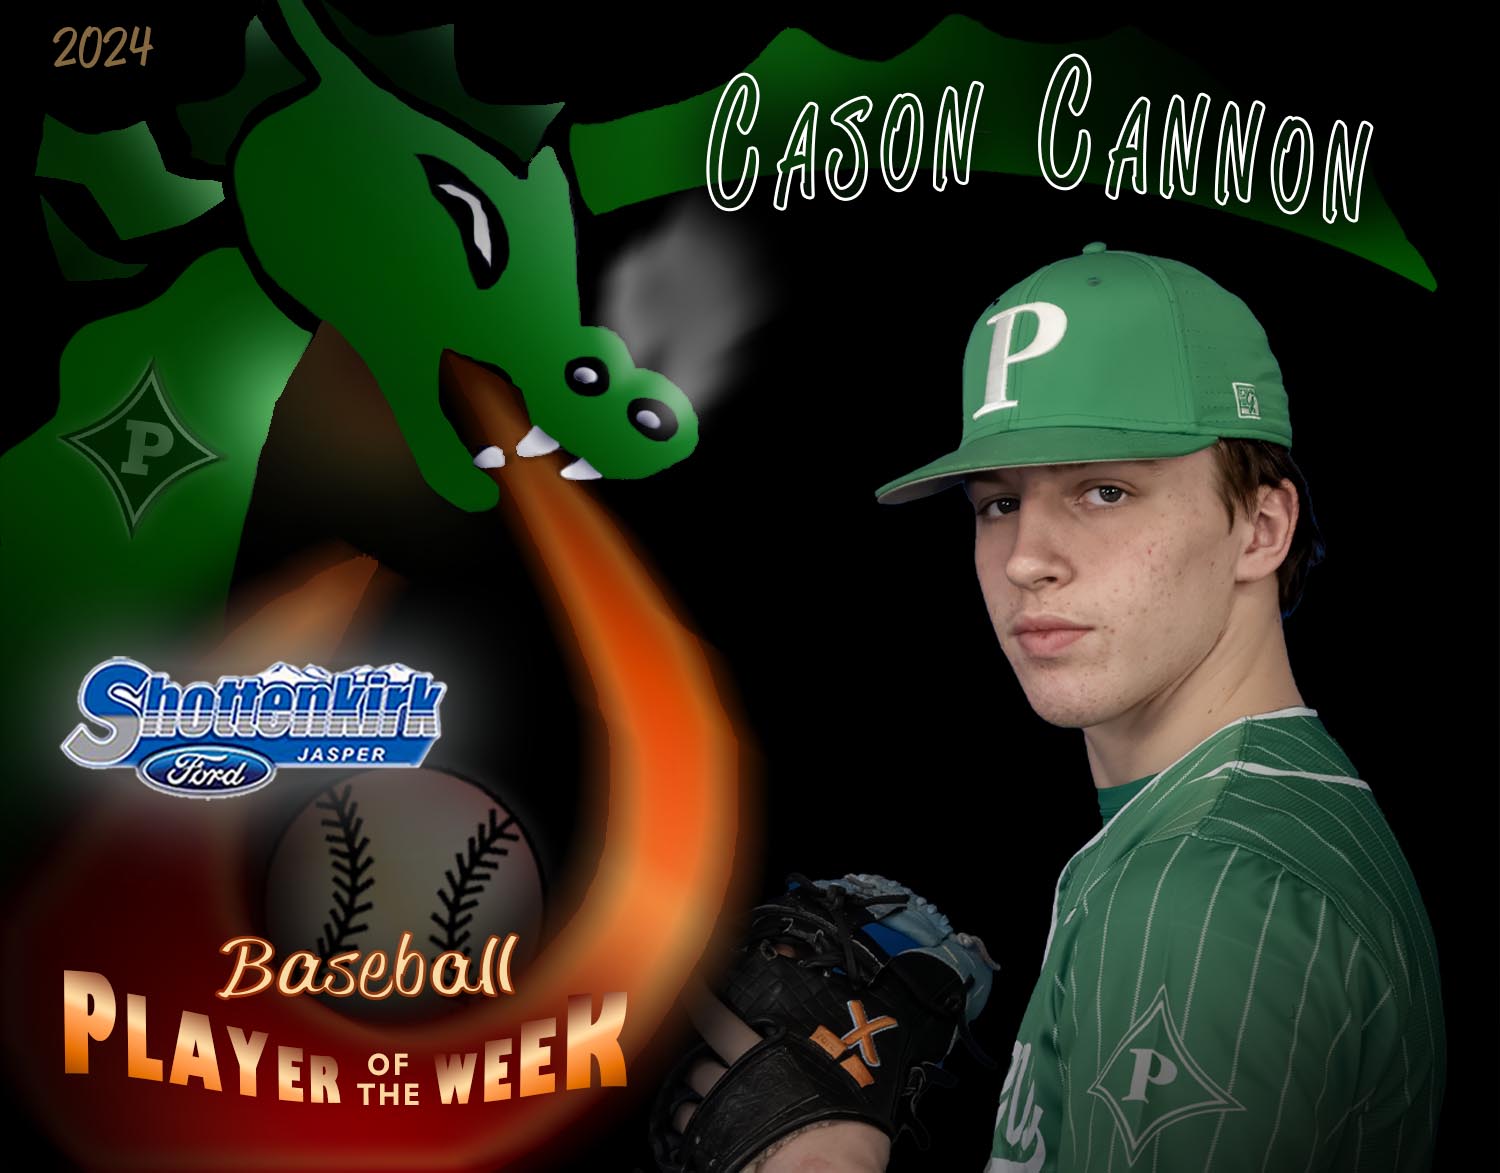 PHS Dragons Baseball Player of the Week #6 - Cason Cannon